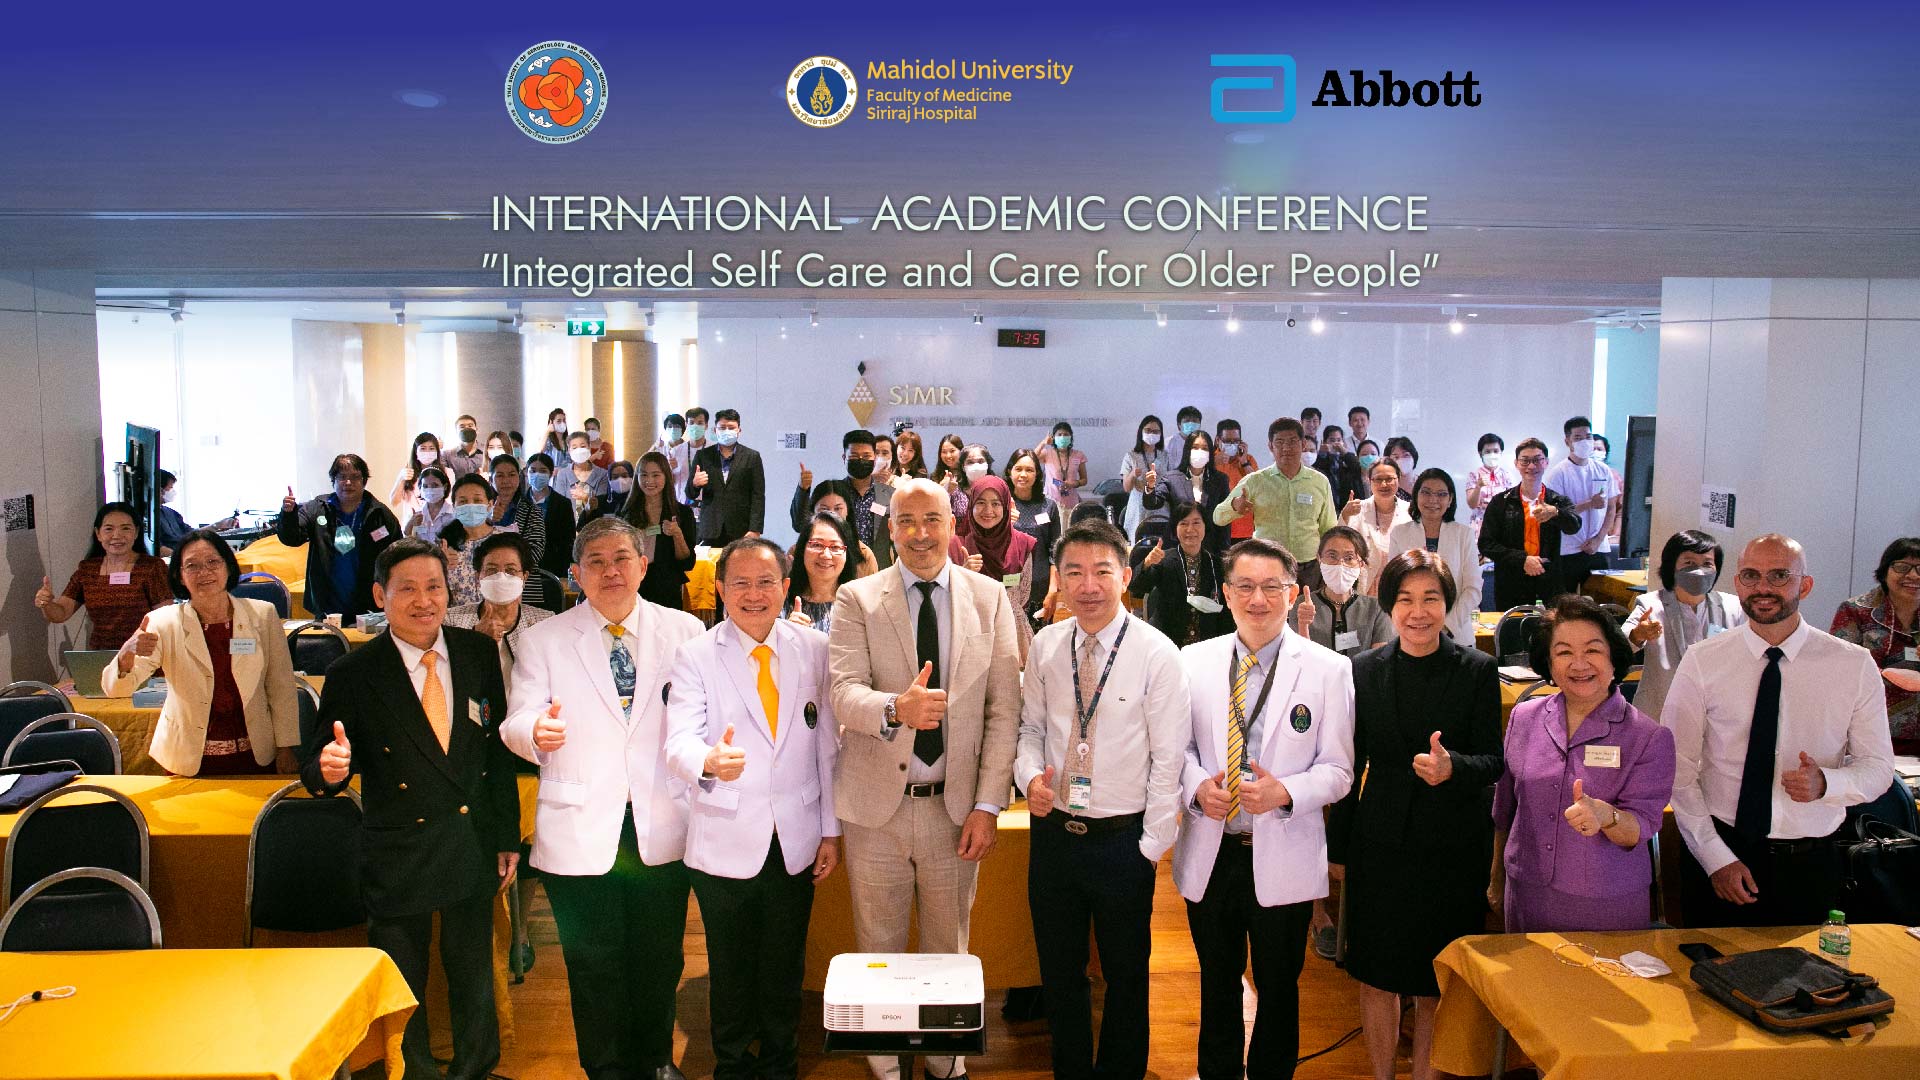 International Academic Conference “Integrated Self Care and Care for Older People”